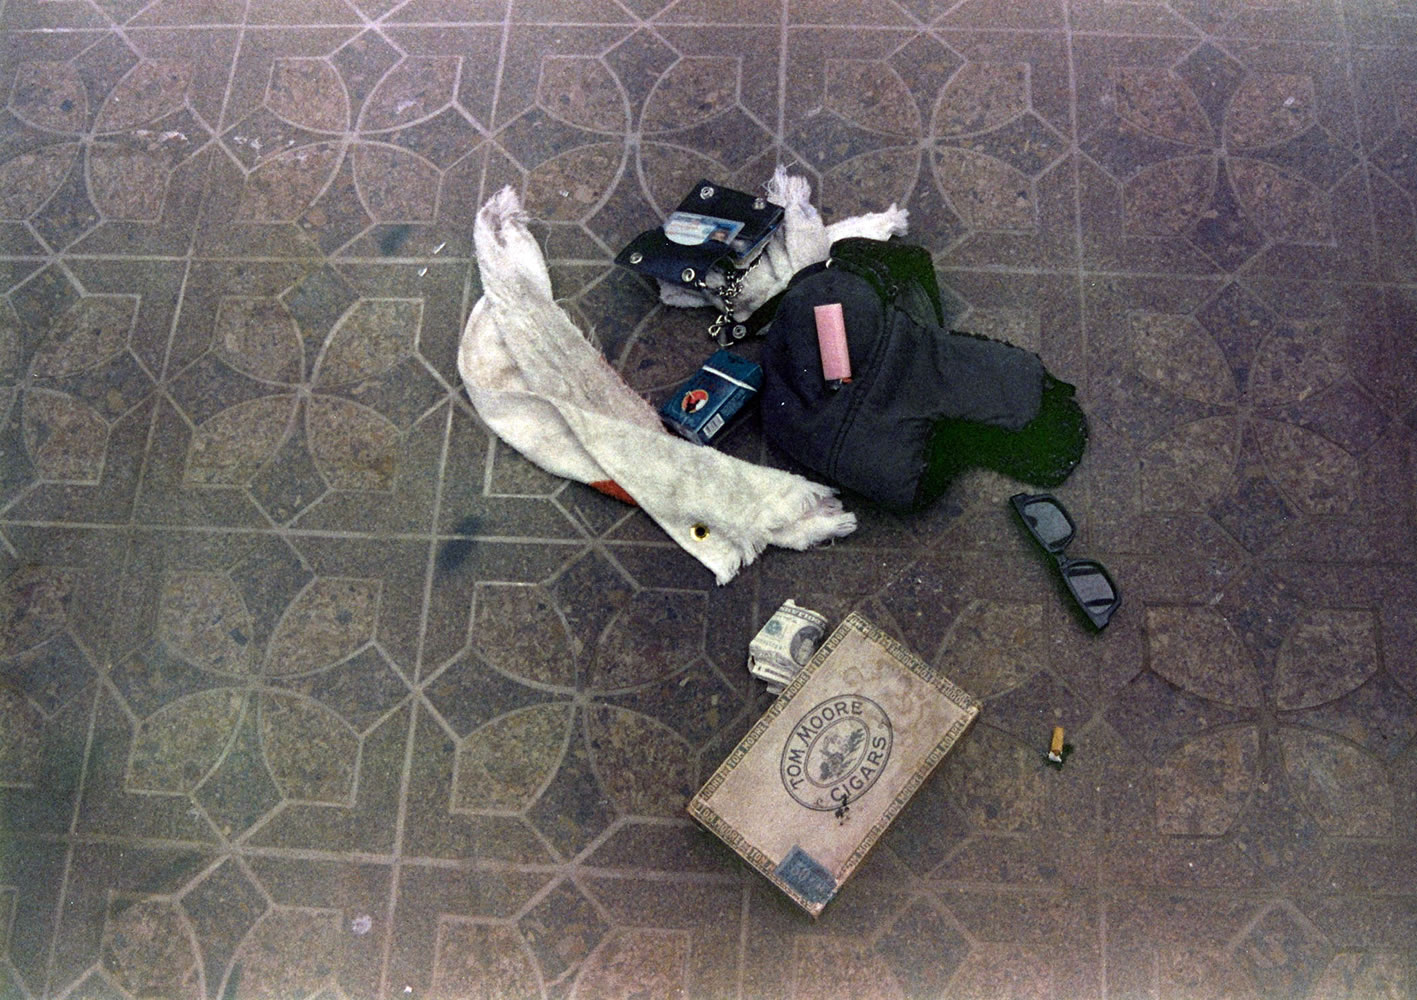 This April 1994 photo provided by the Seattle Police Department shows items found at the scene of Kurt Cobain's suicide.